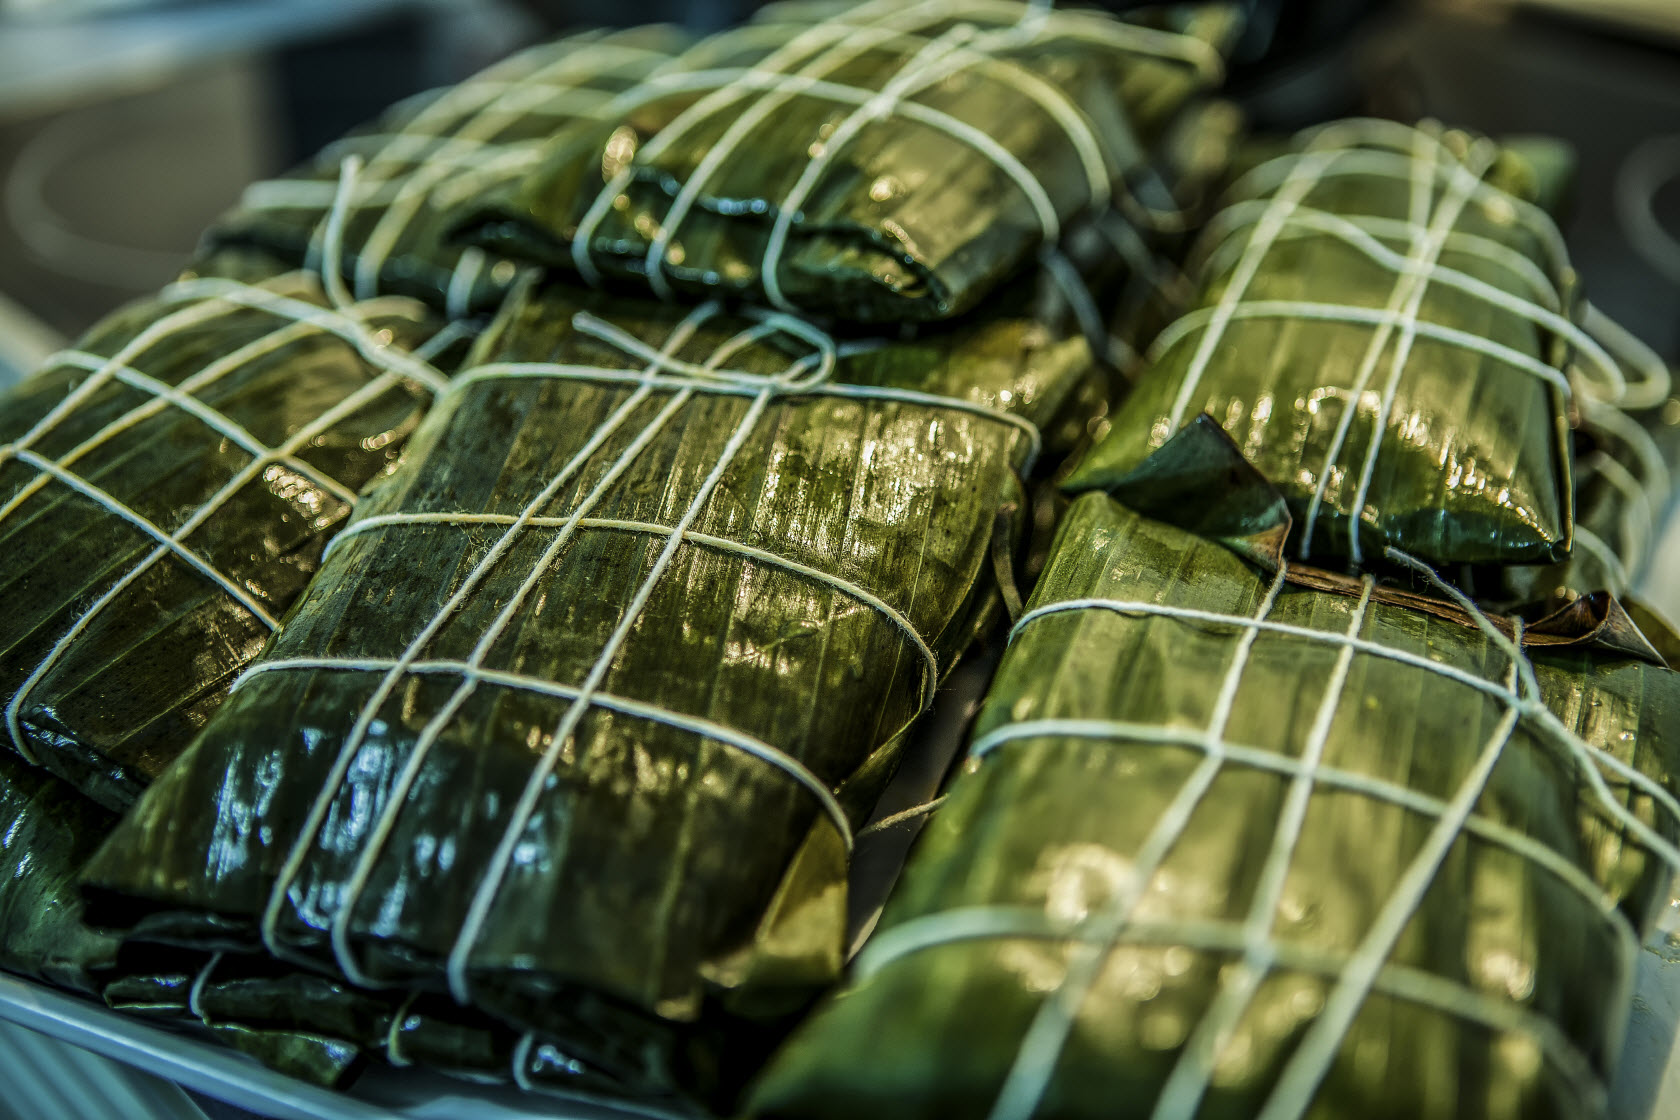 This image:  Ecuadorians wrap tamales wrapped in banana leaves, rather than corn leaves elsewhere in South America. 